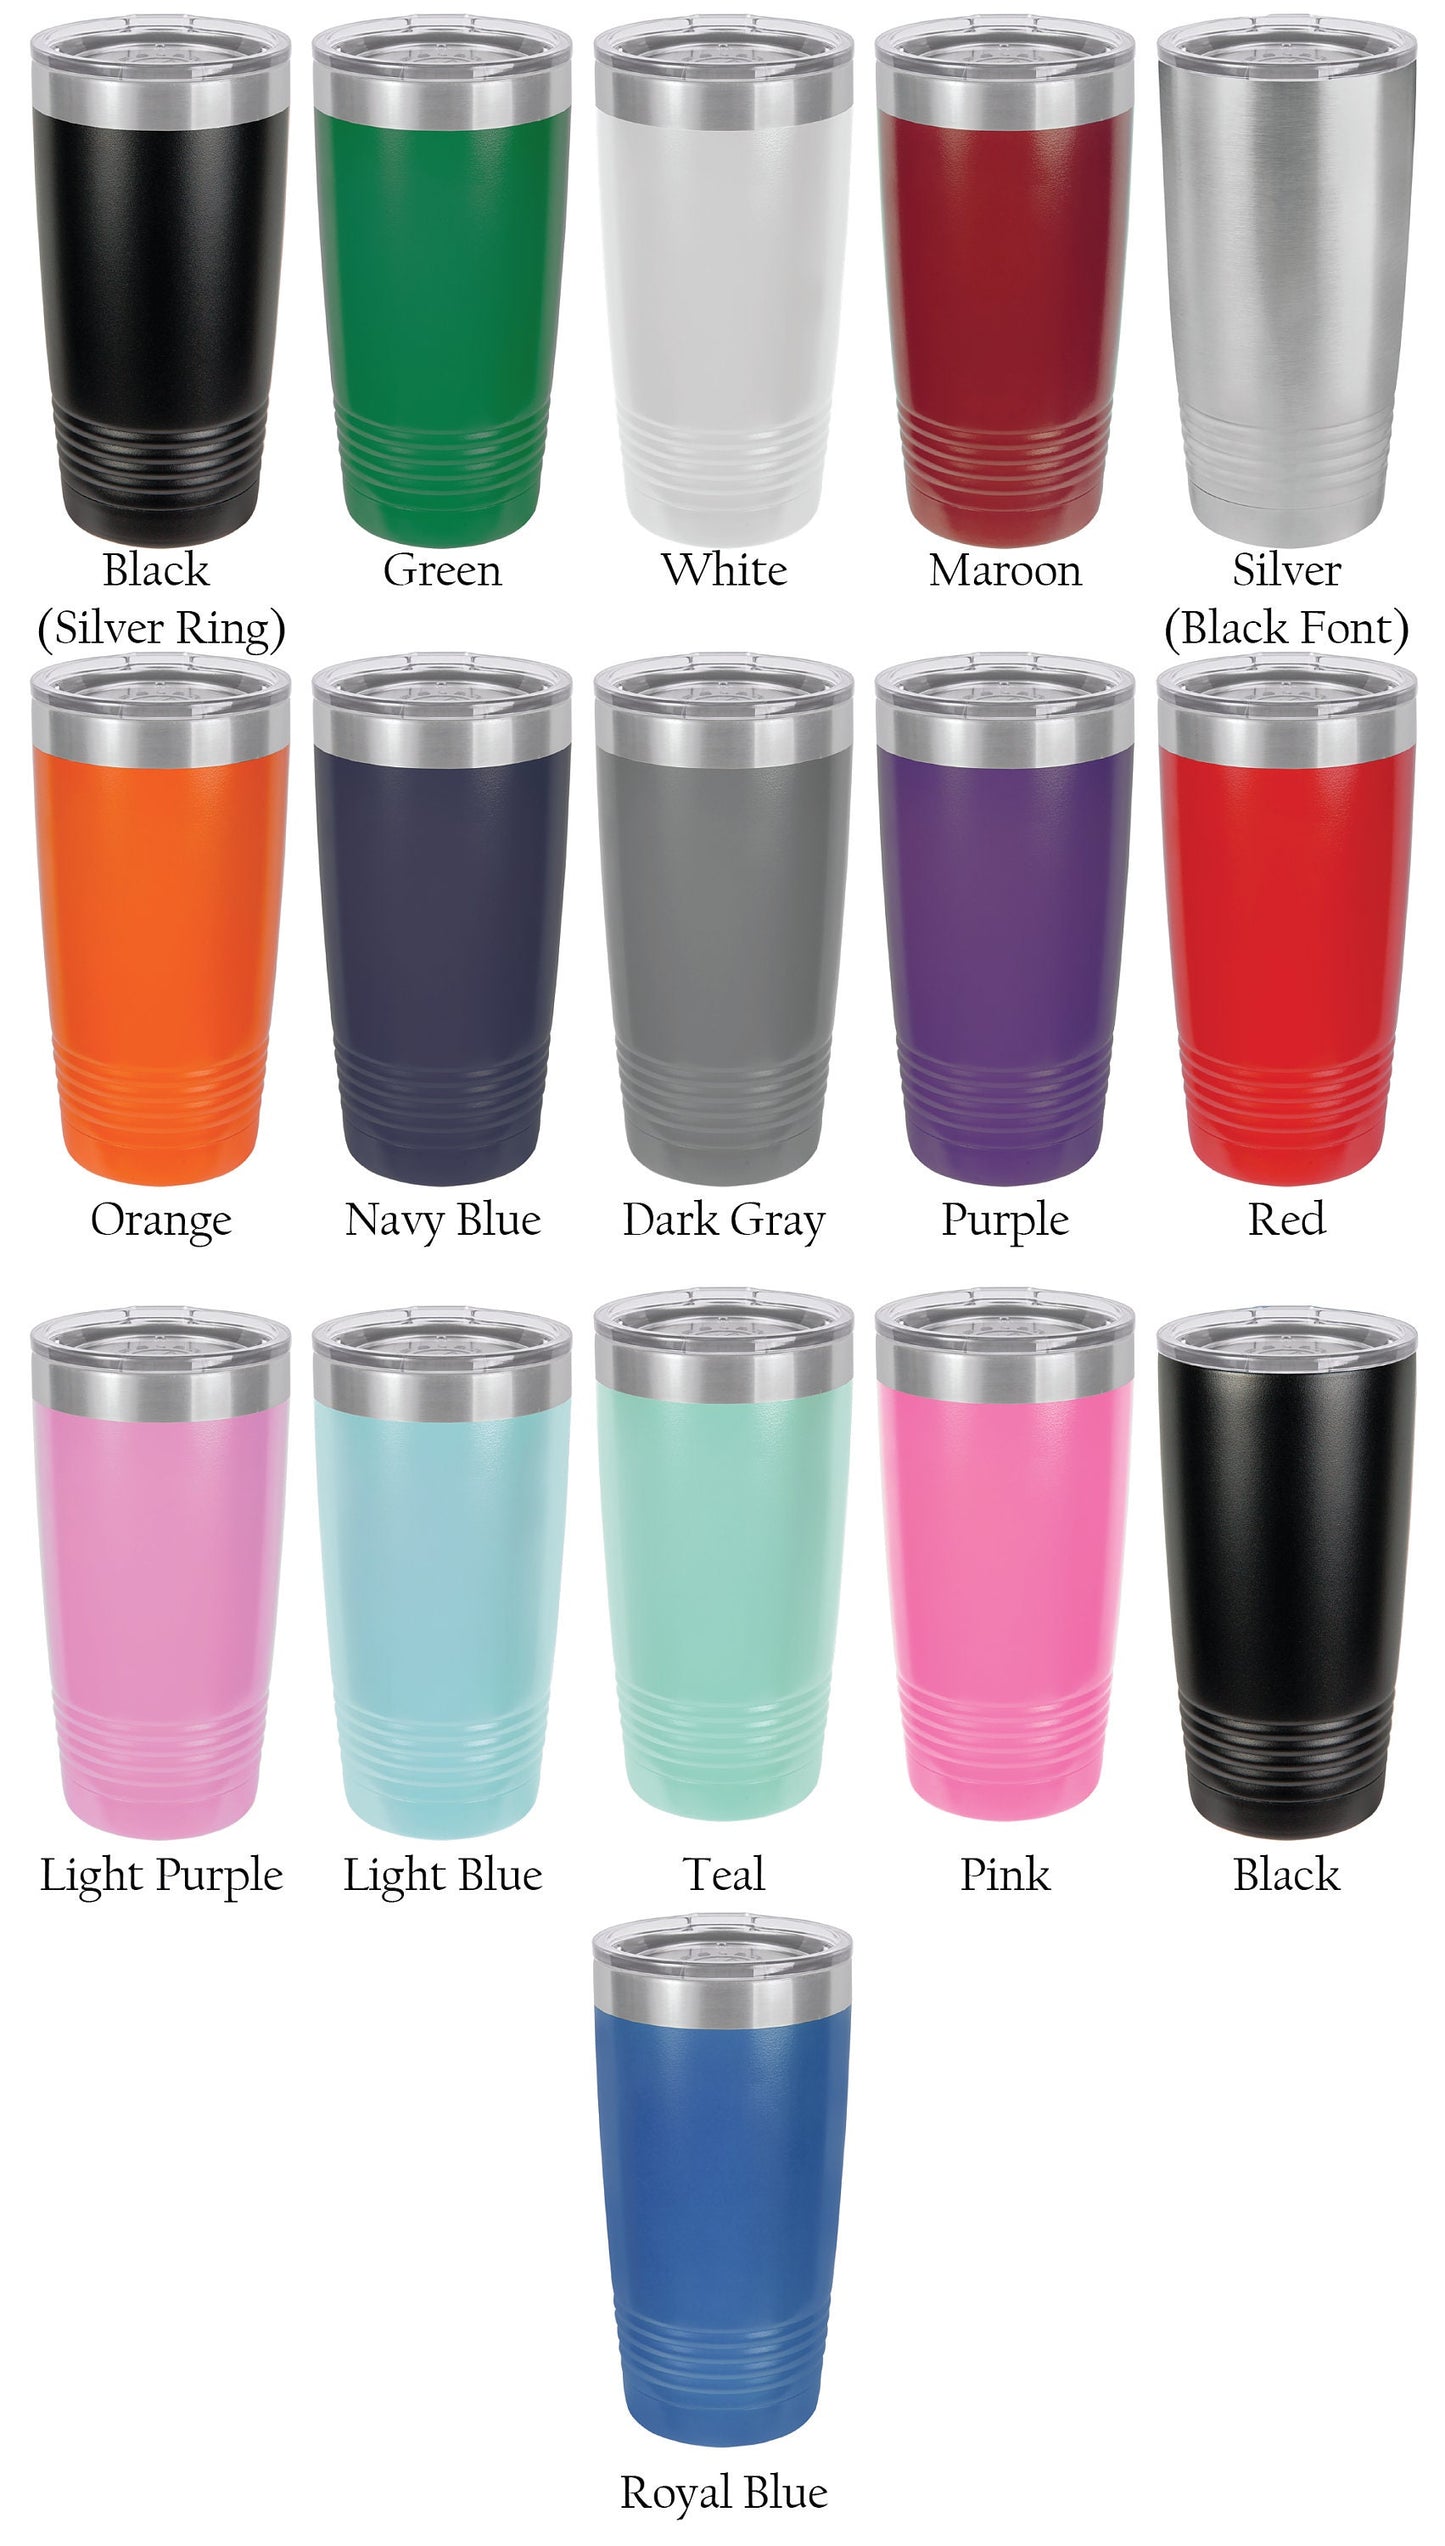 We Rise By Lifting Others 20 oz. Tumbler